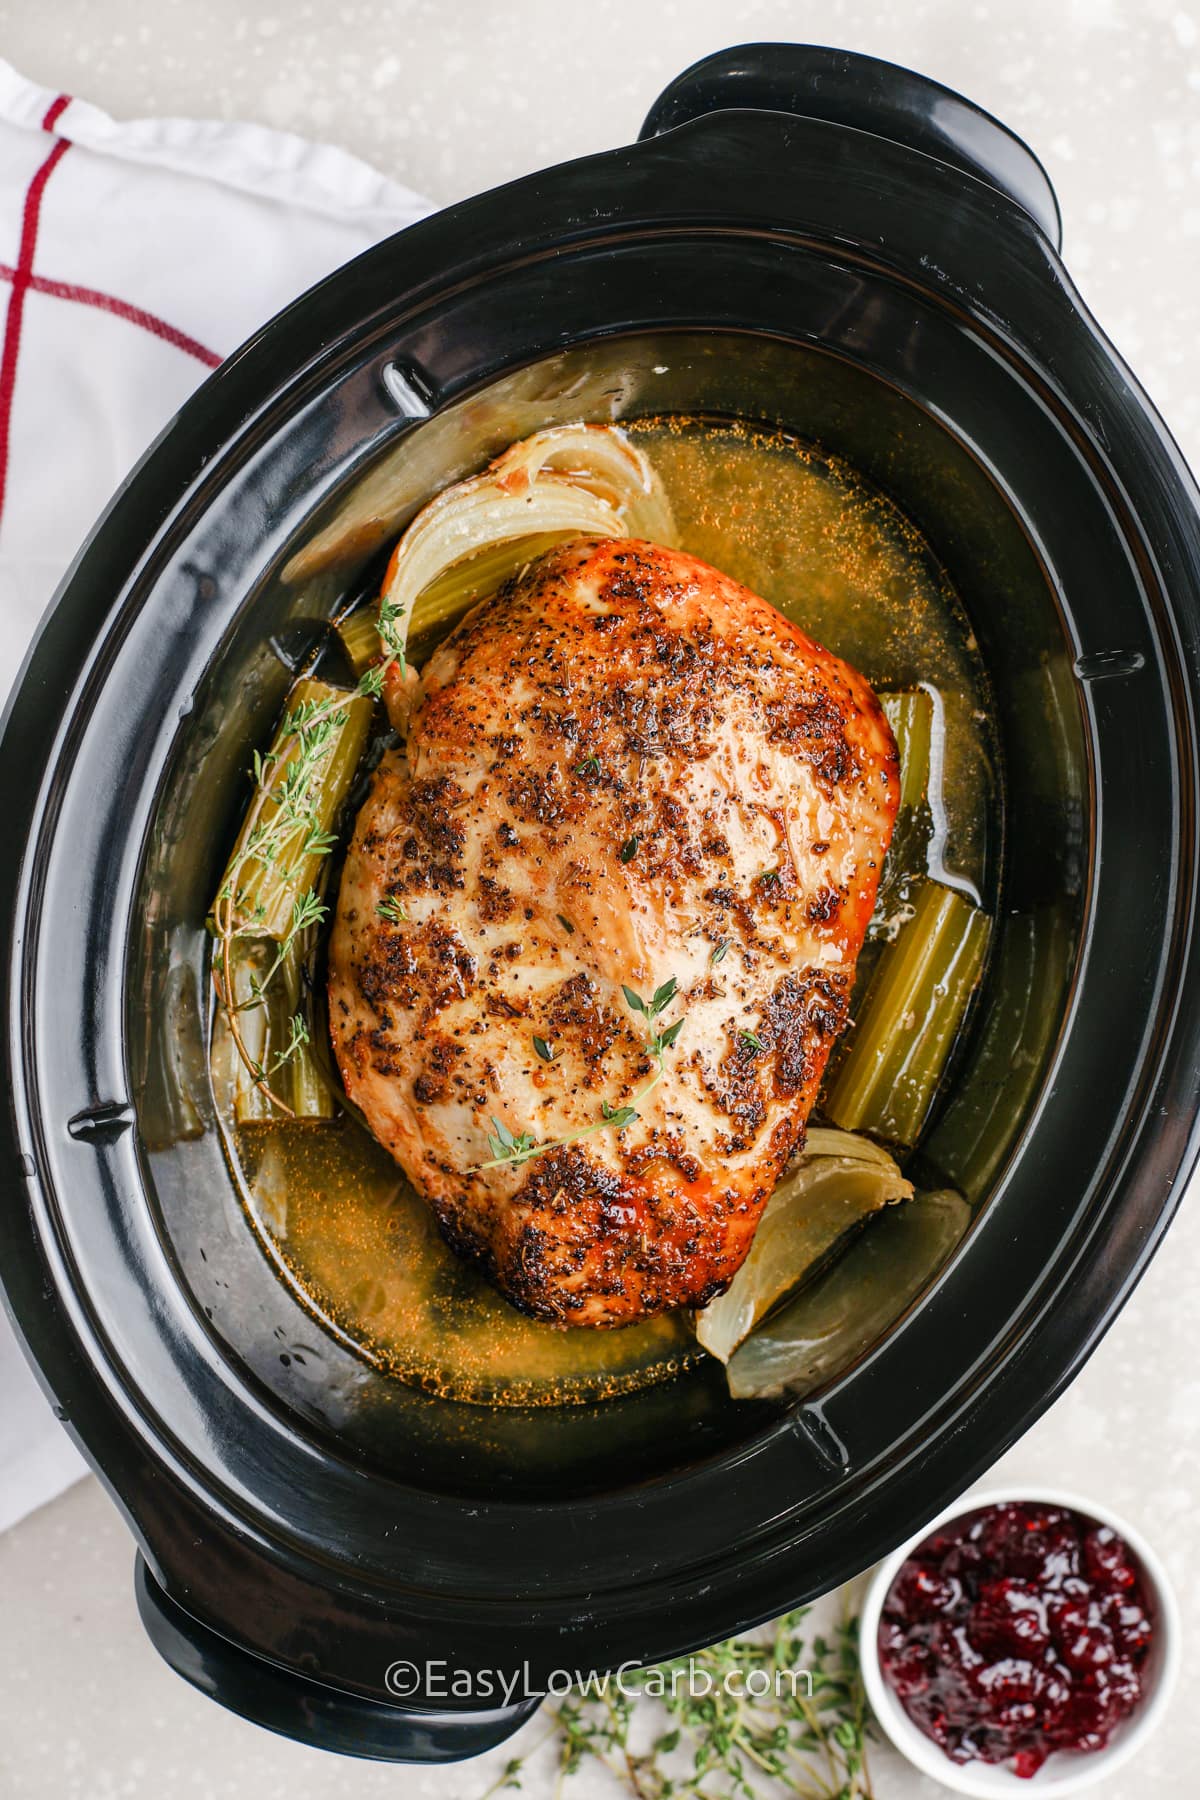 a turkey breast cooked in a crockpot